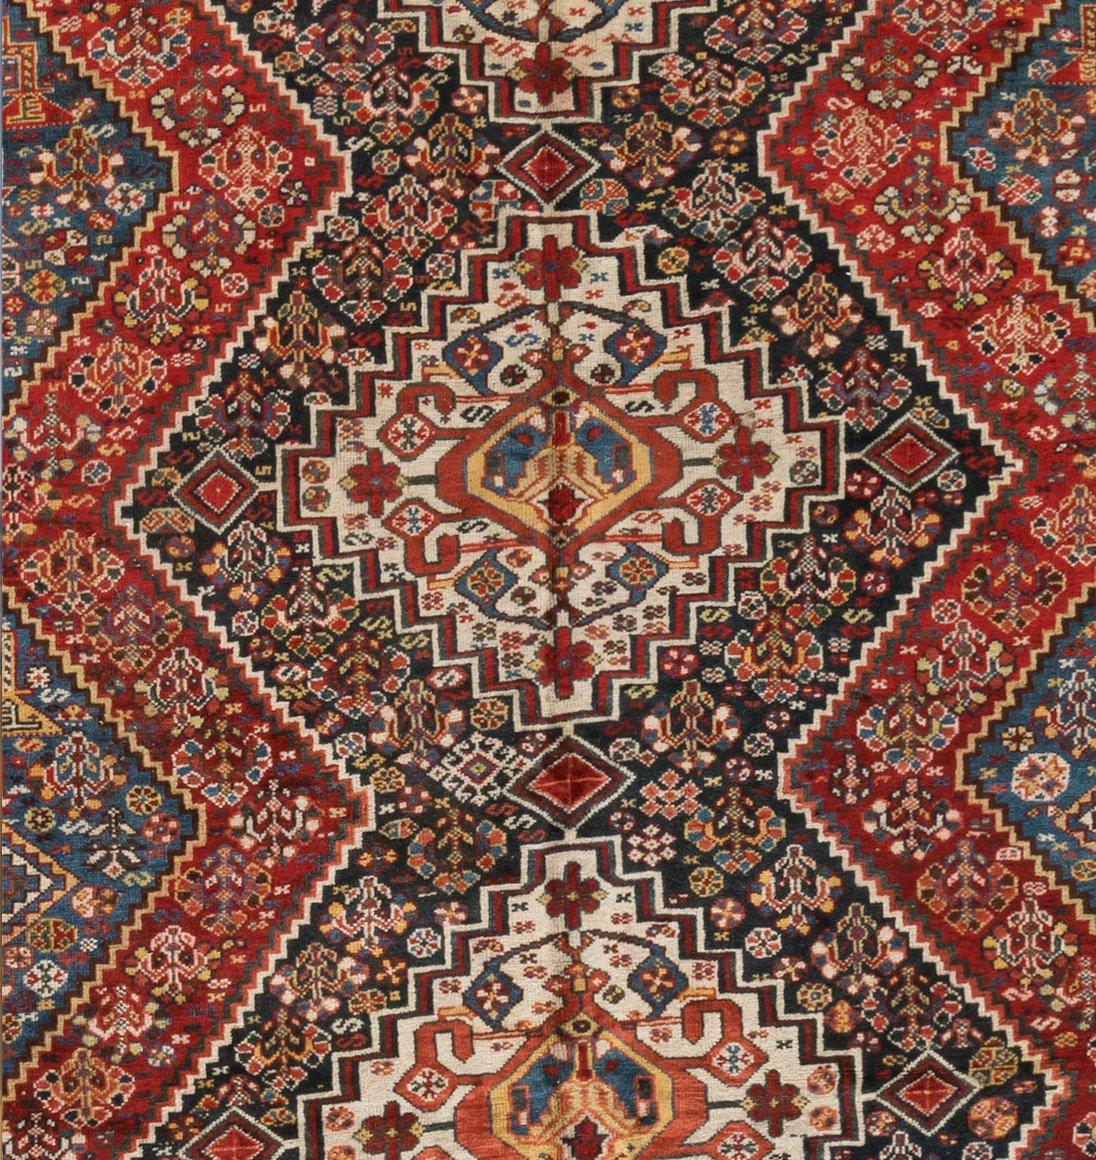 This lovely antique Persian Ghashgai navy geometric carpet measures 6.6 x 9.10 ft. and is from 1920s-1930s.

